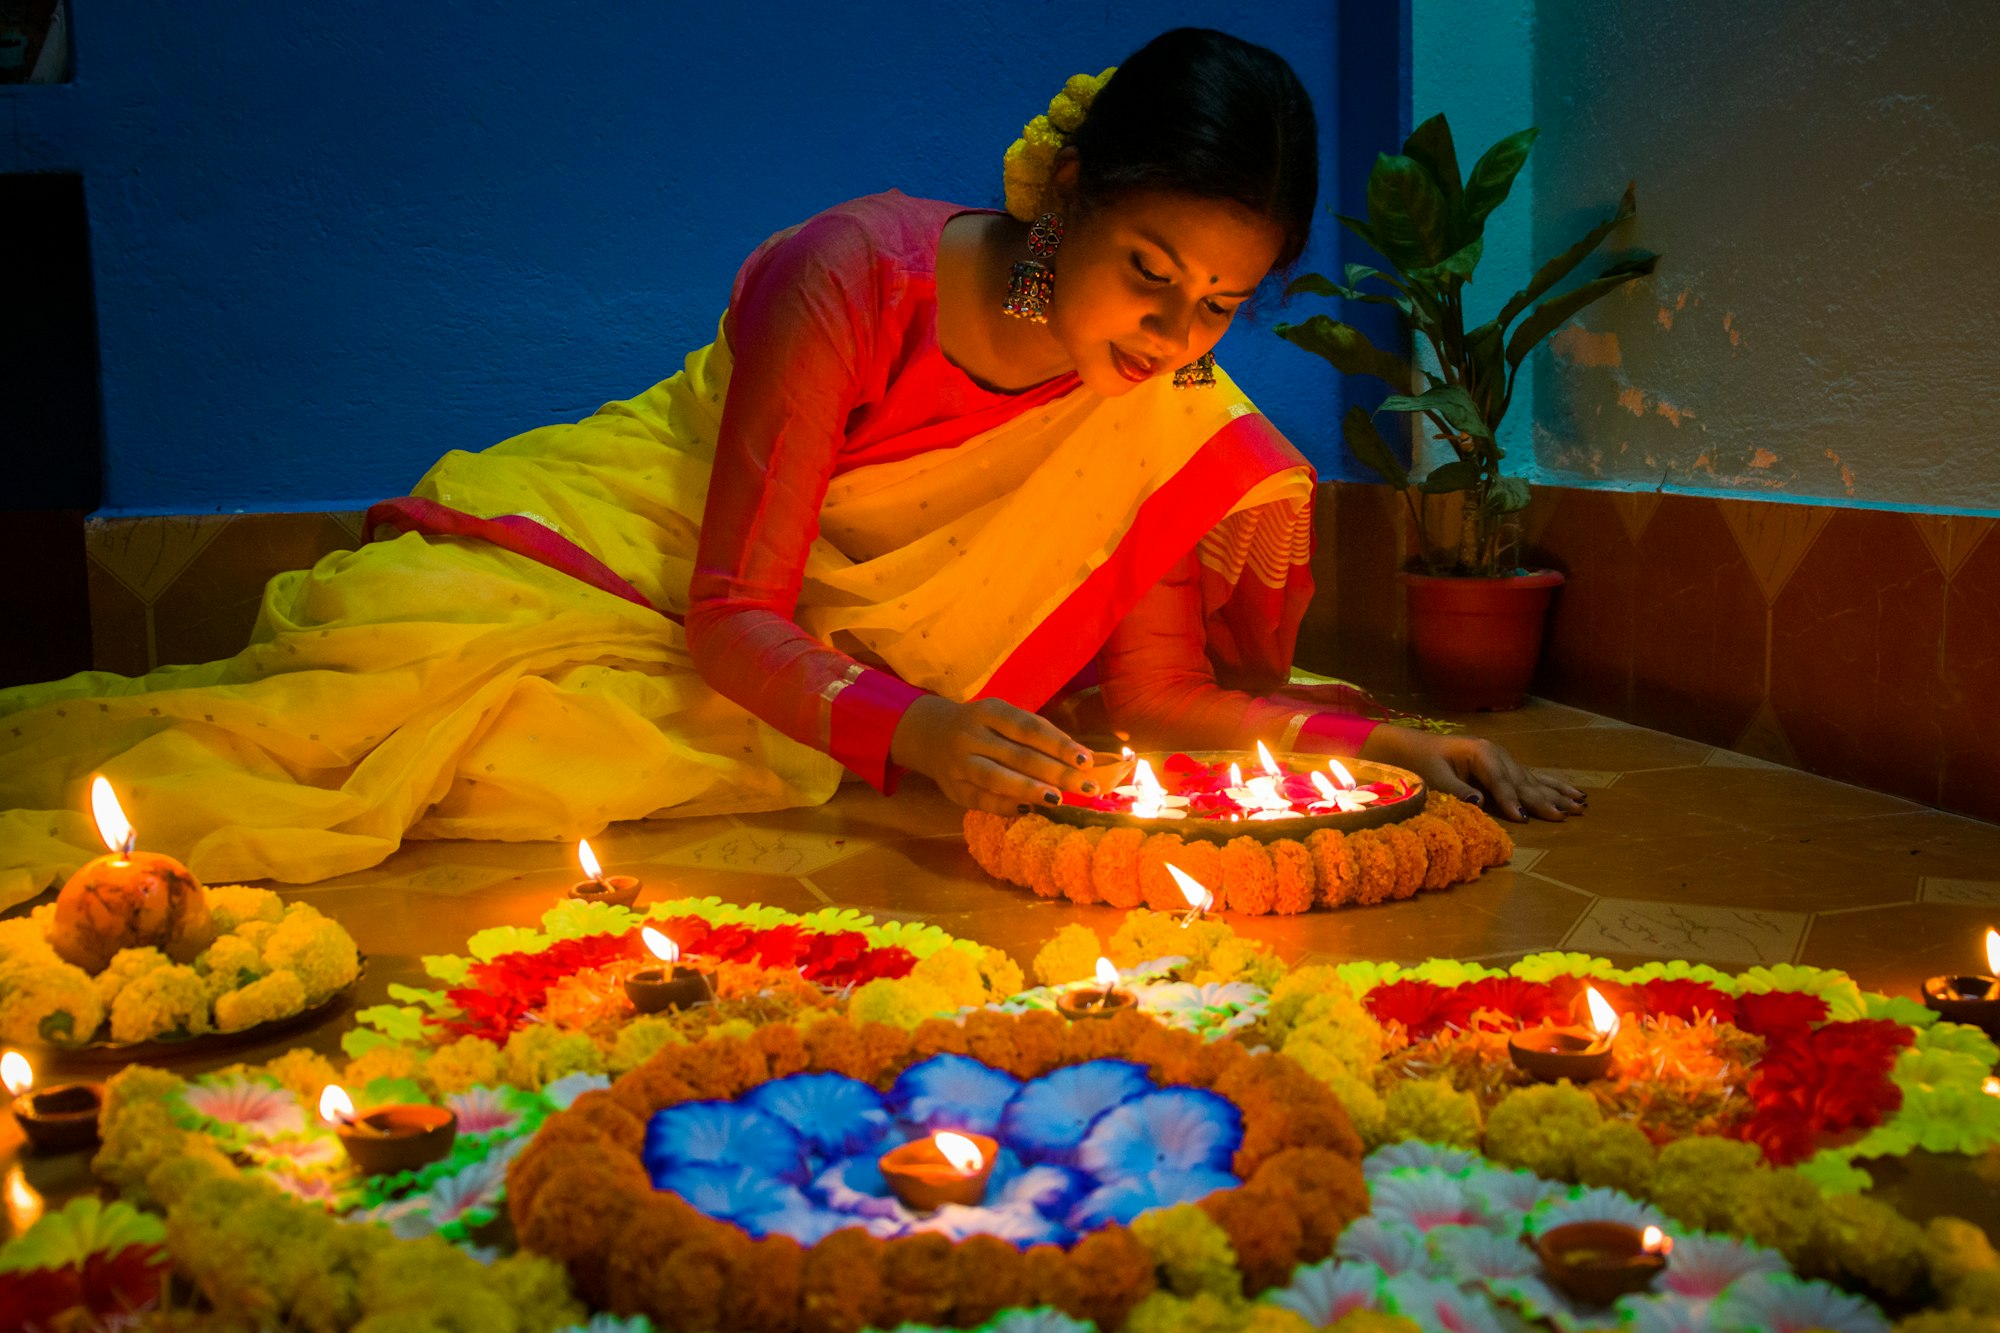 a woman sitting in front of a cake with lit candles